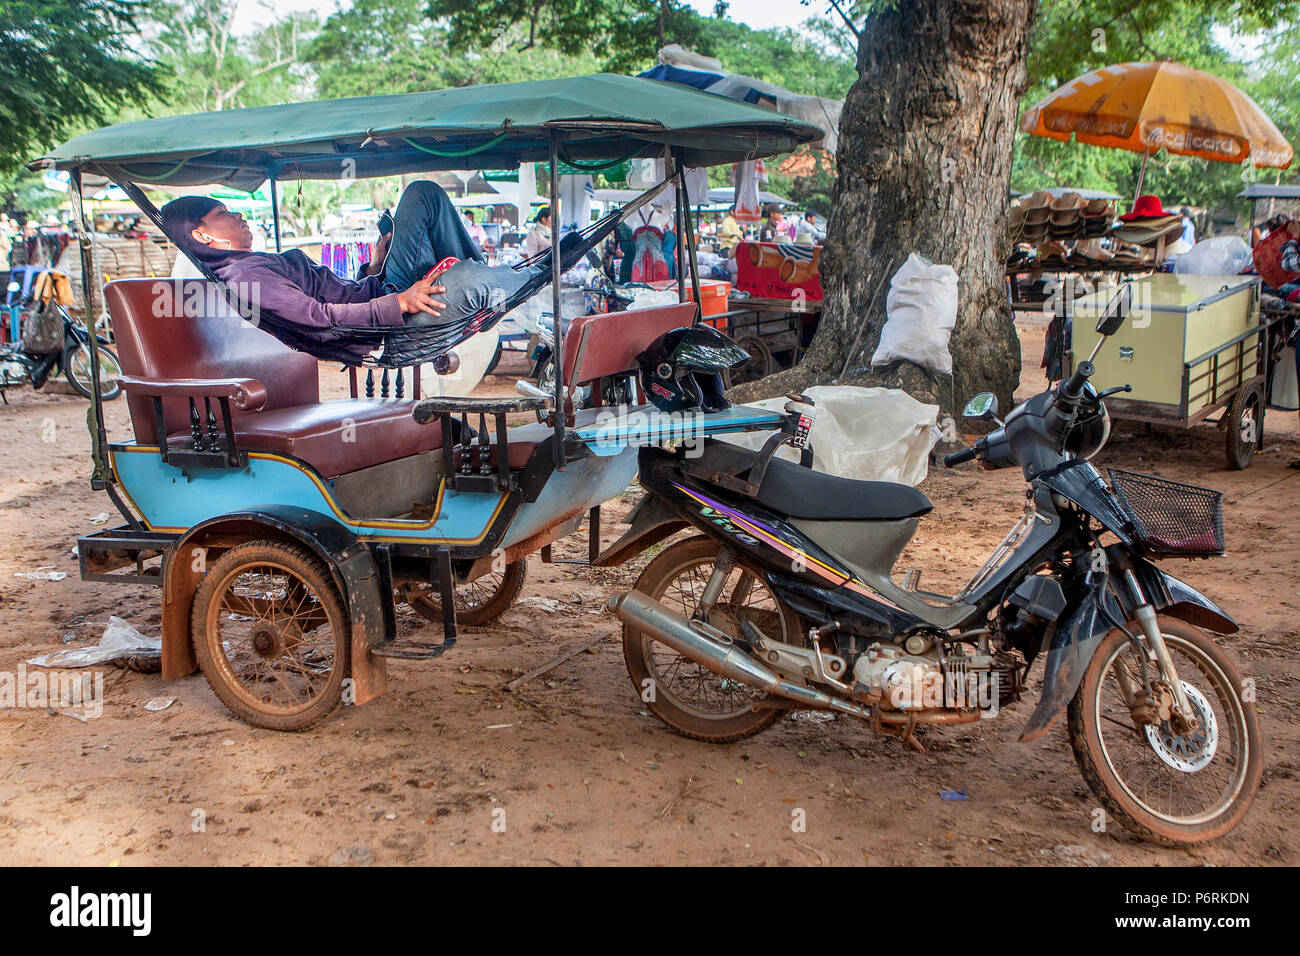 A tuk tuk driver relaxes in his hammock listening to music on his smartphone at Angkor Wat, Siem Reap, Cambodia. Stock Photo